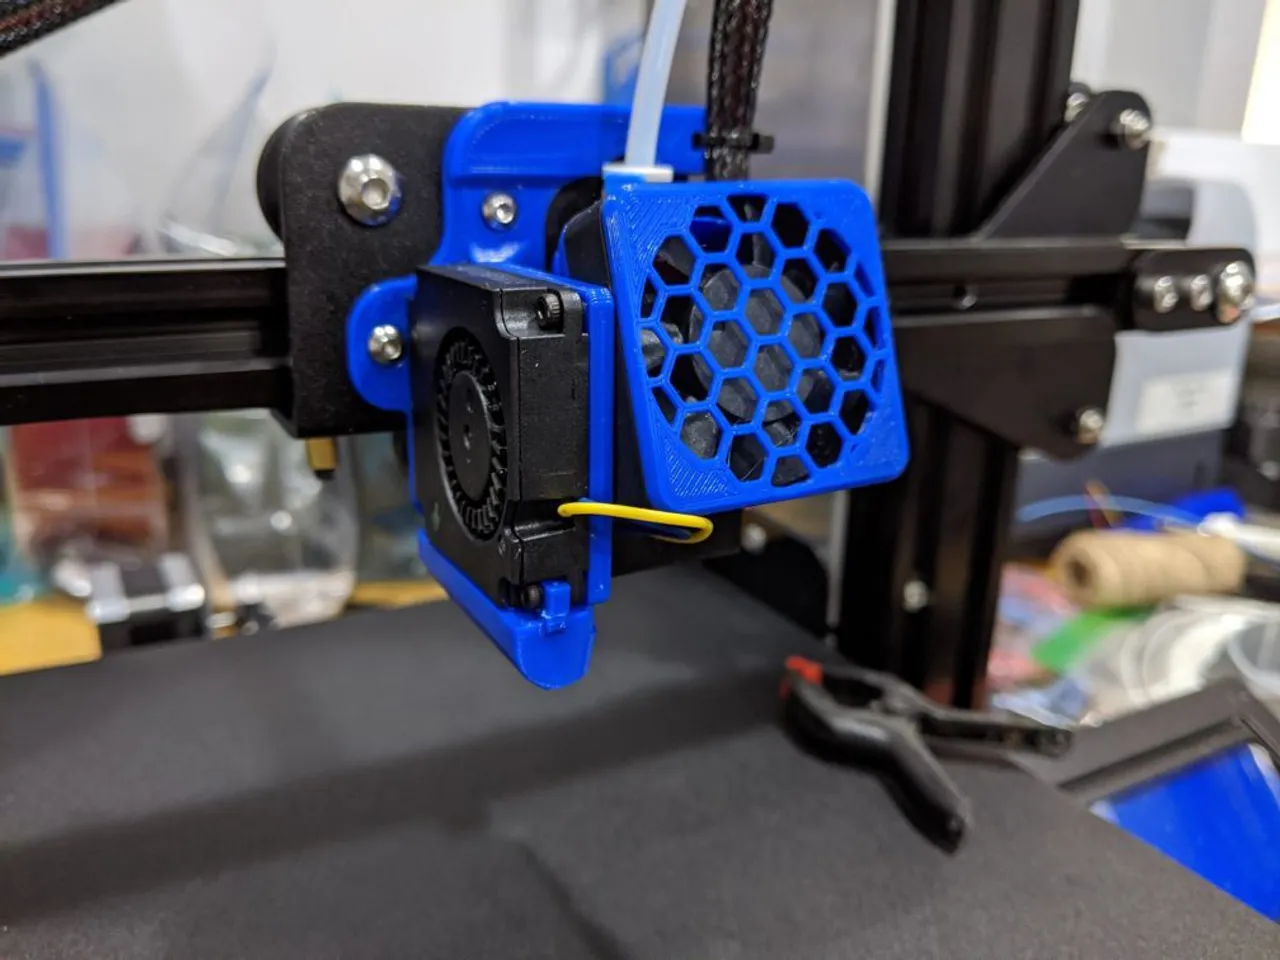 First 24 Upgrades for my Ender 3 Pro - Part 1 